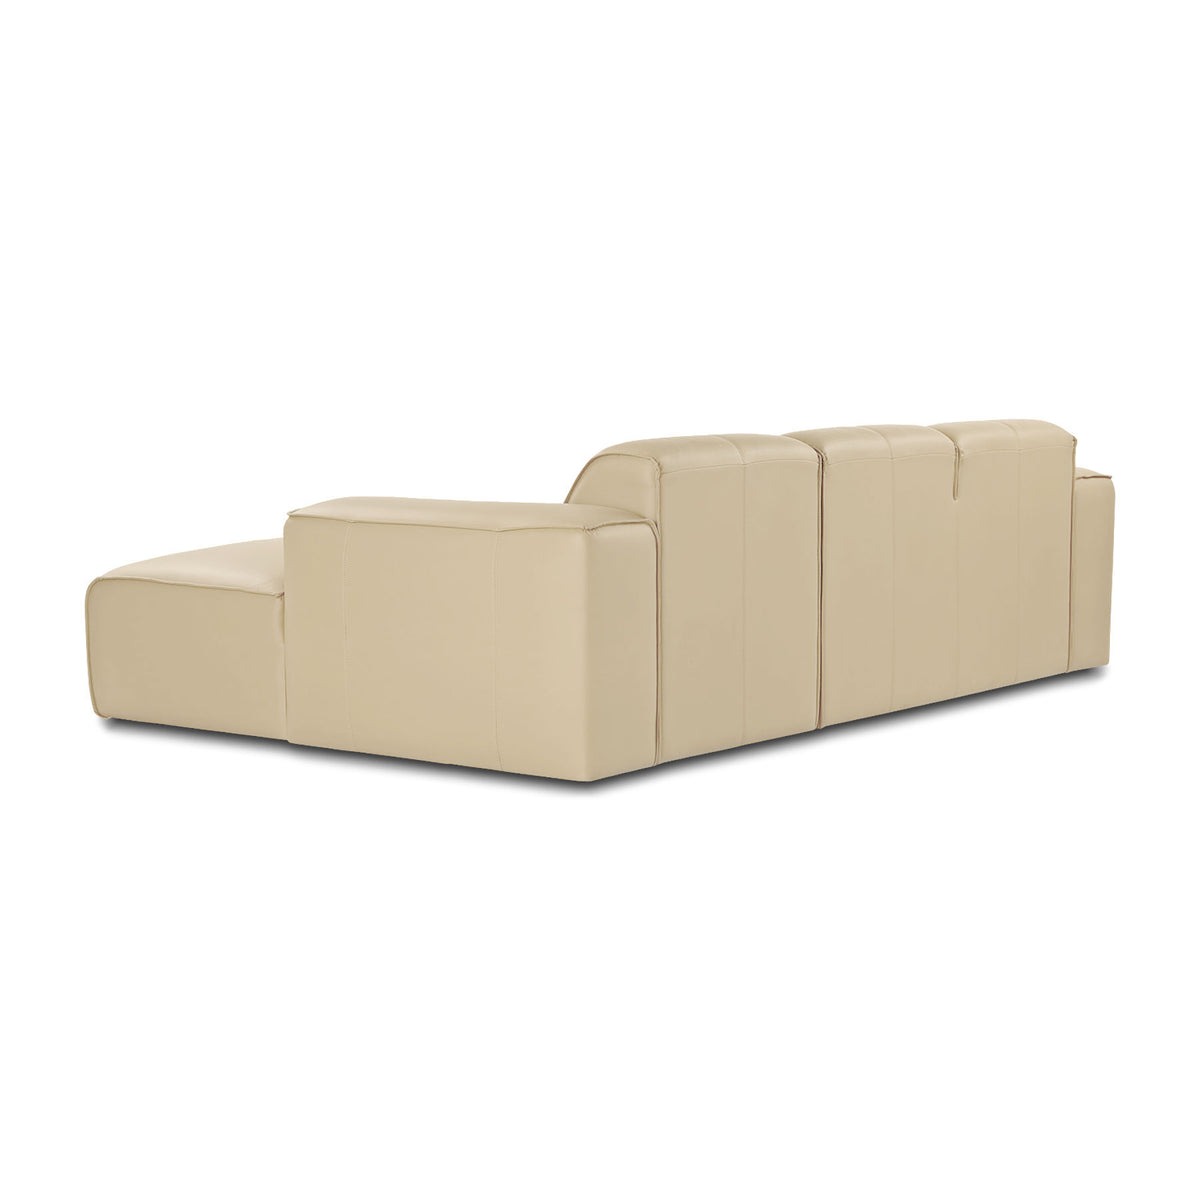 Werfo August 3-Seater Sofa Begi RHS (Right Hand Side)